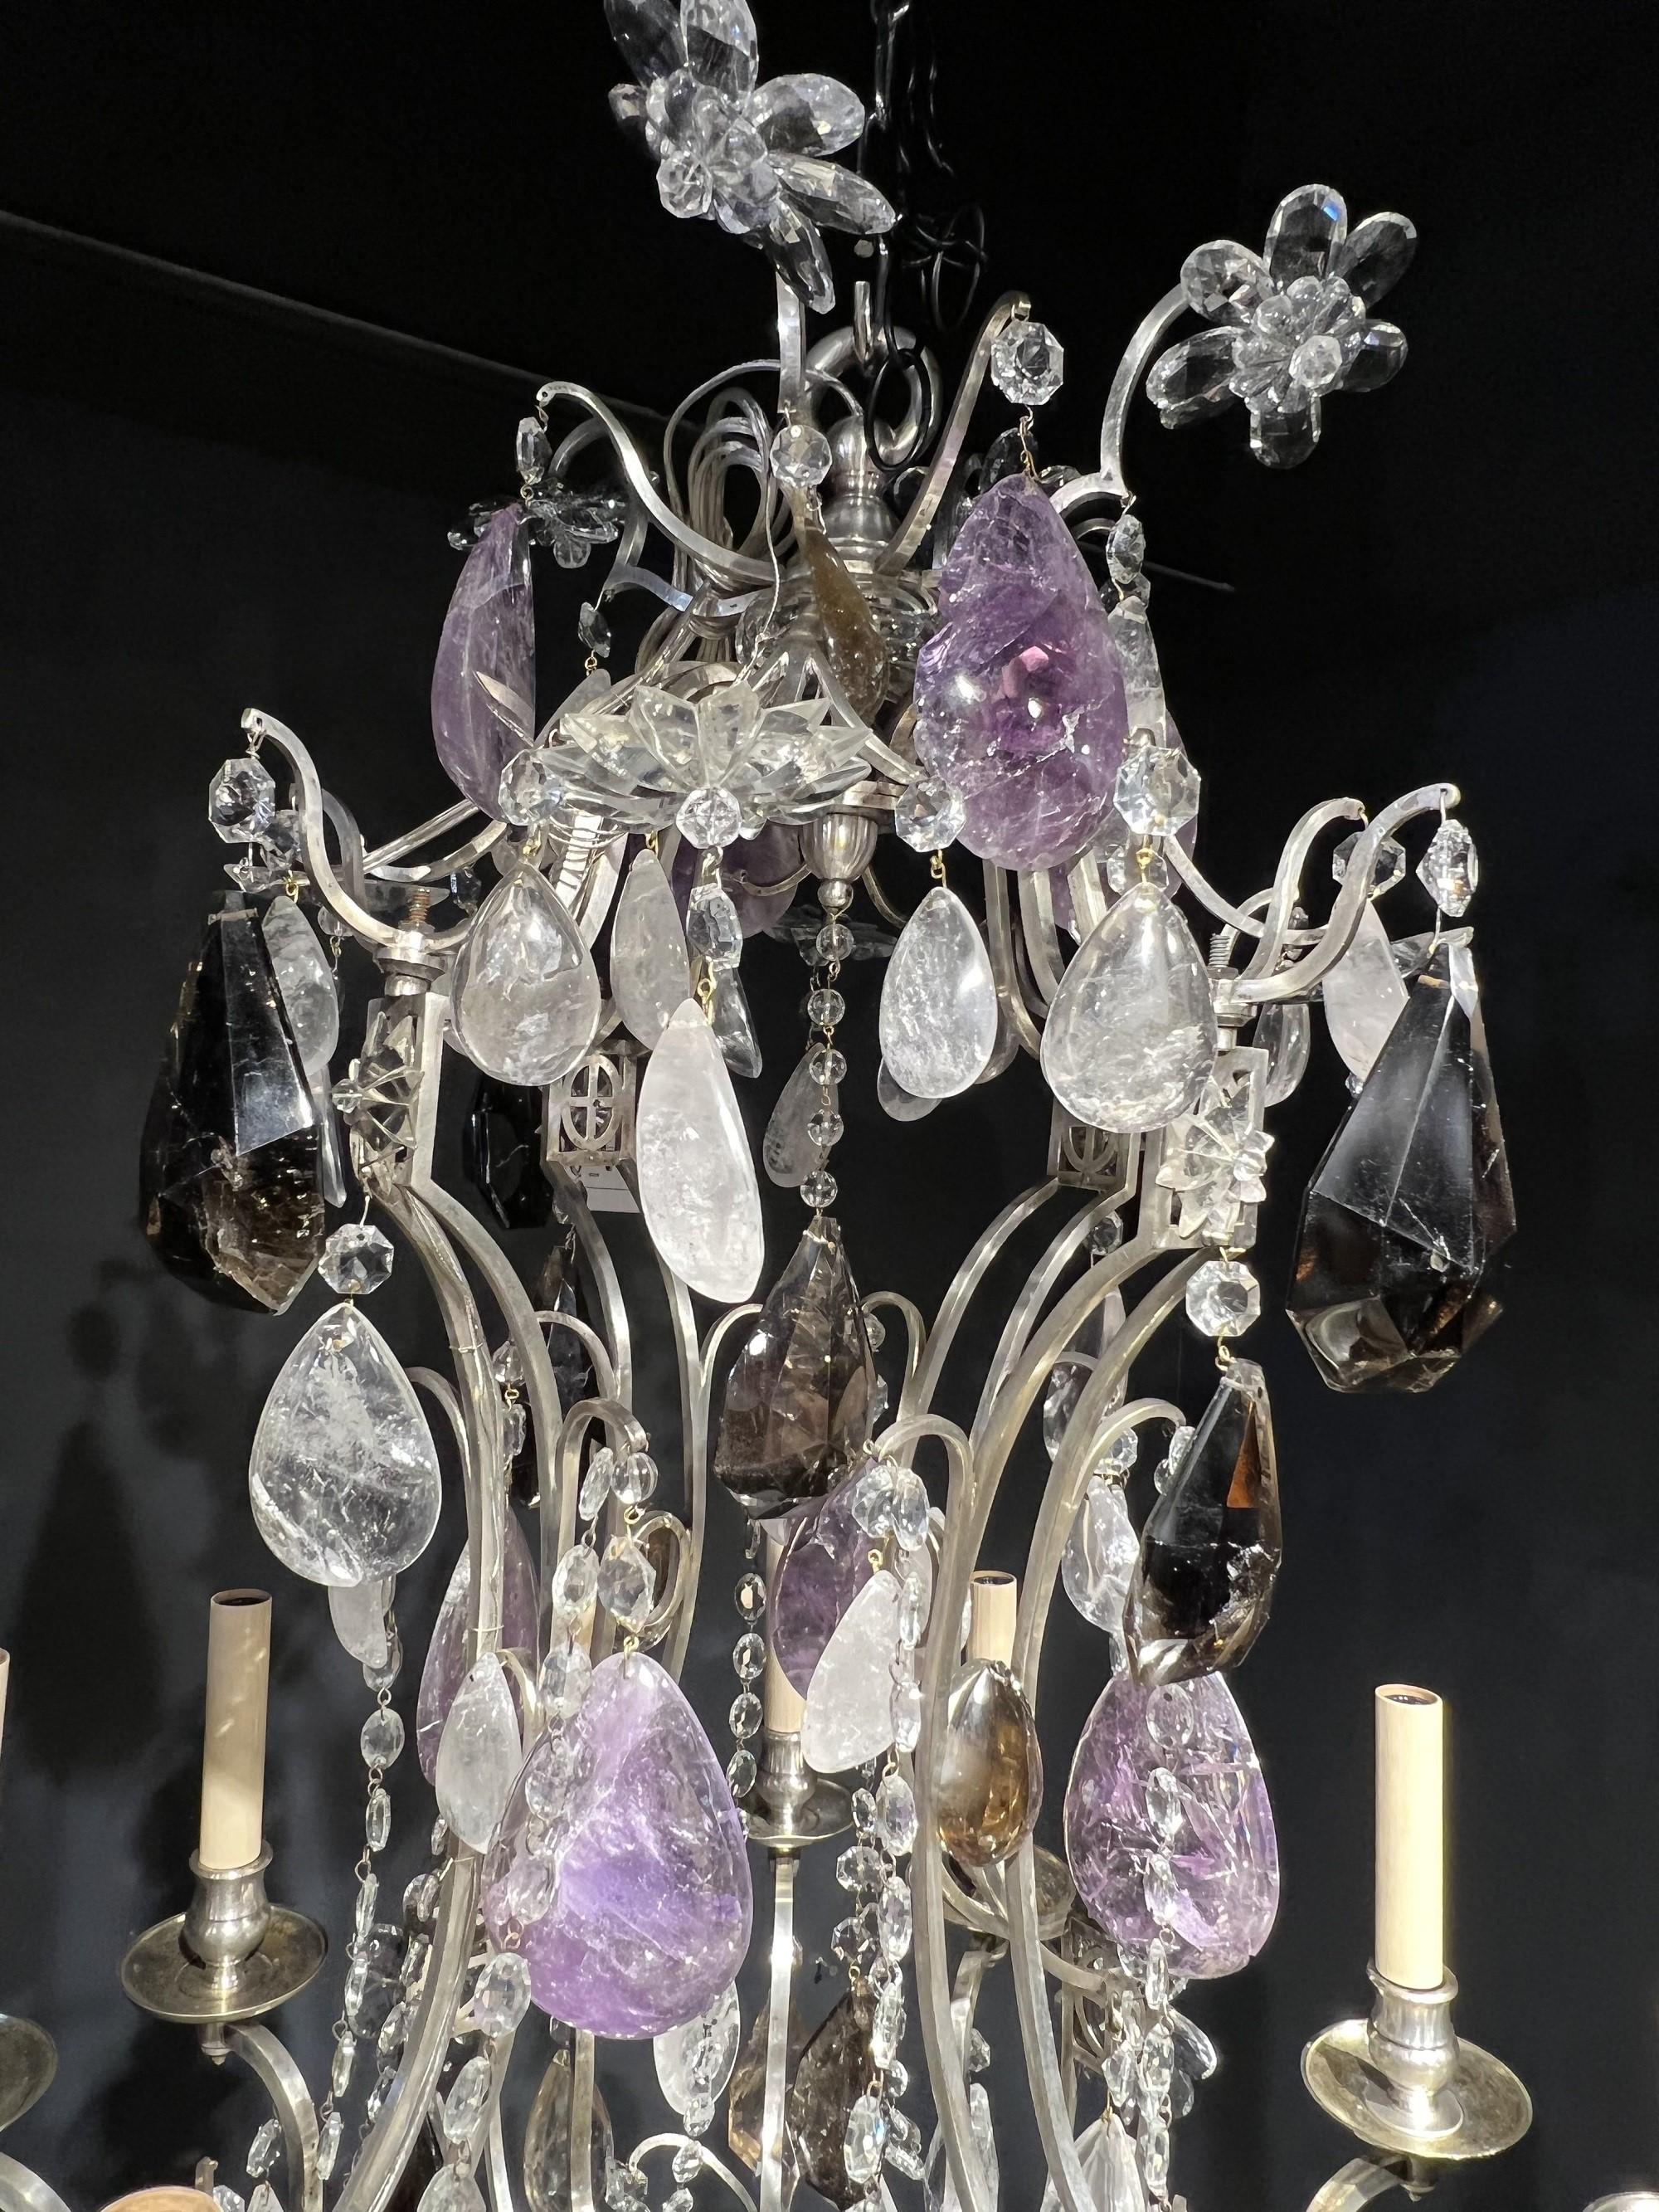 French Provincial 1900's French Silver Plated Chandelier with Rock and Amethyst Crystals For Sale